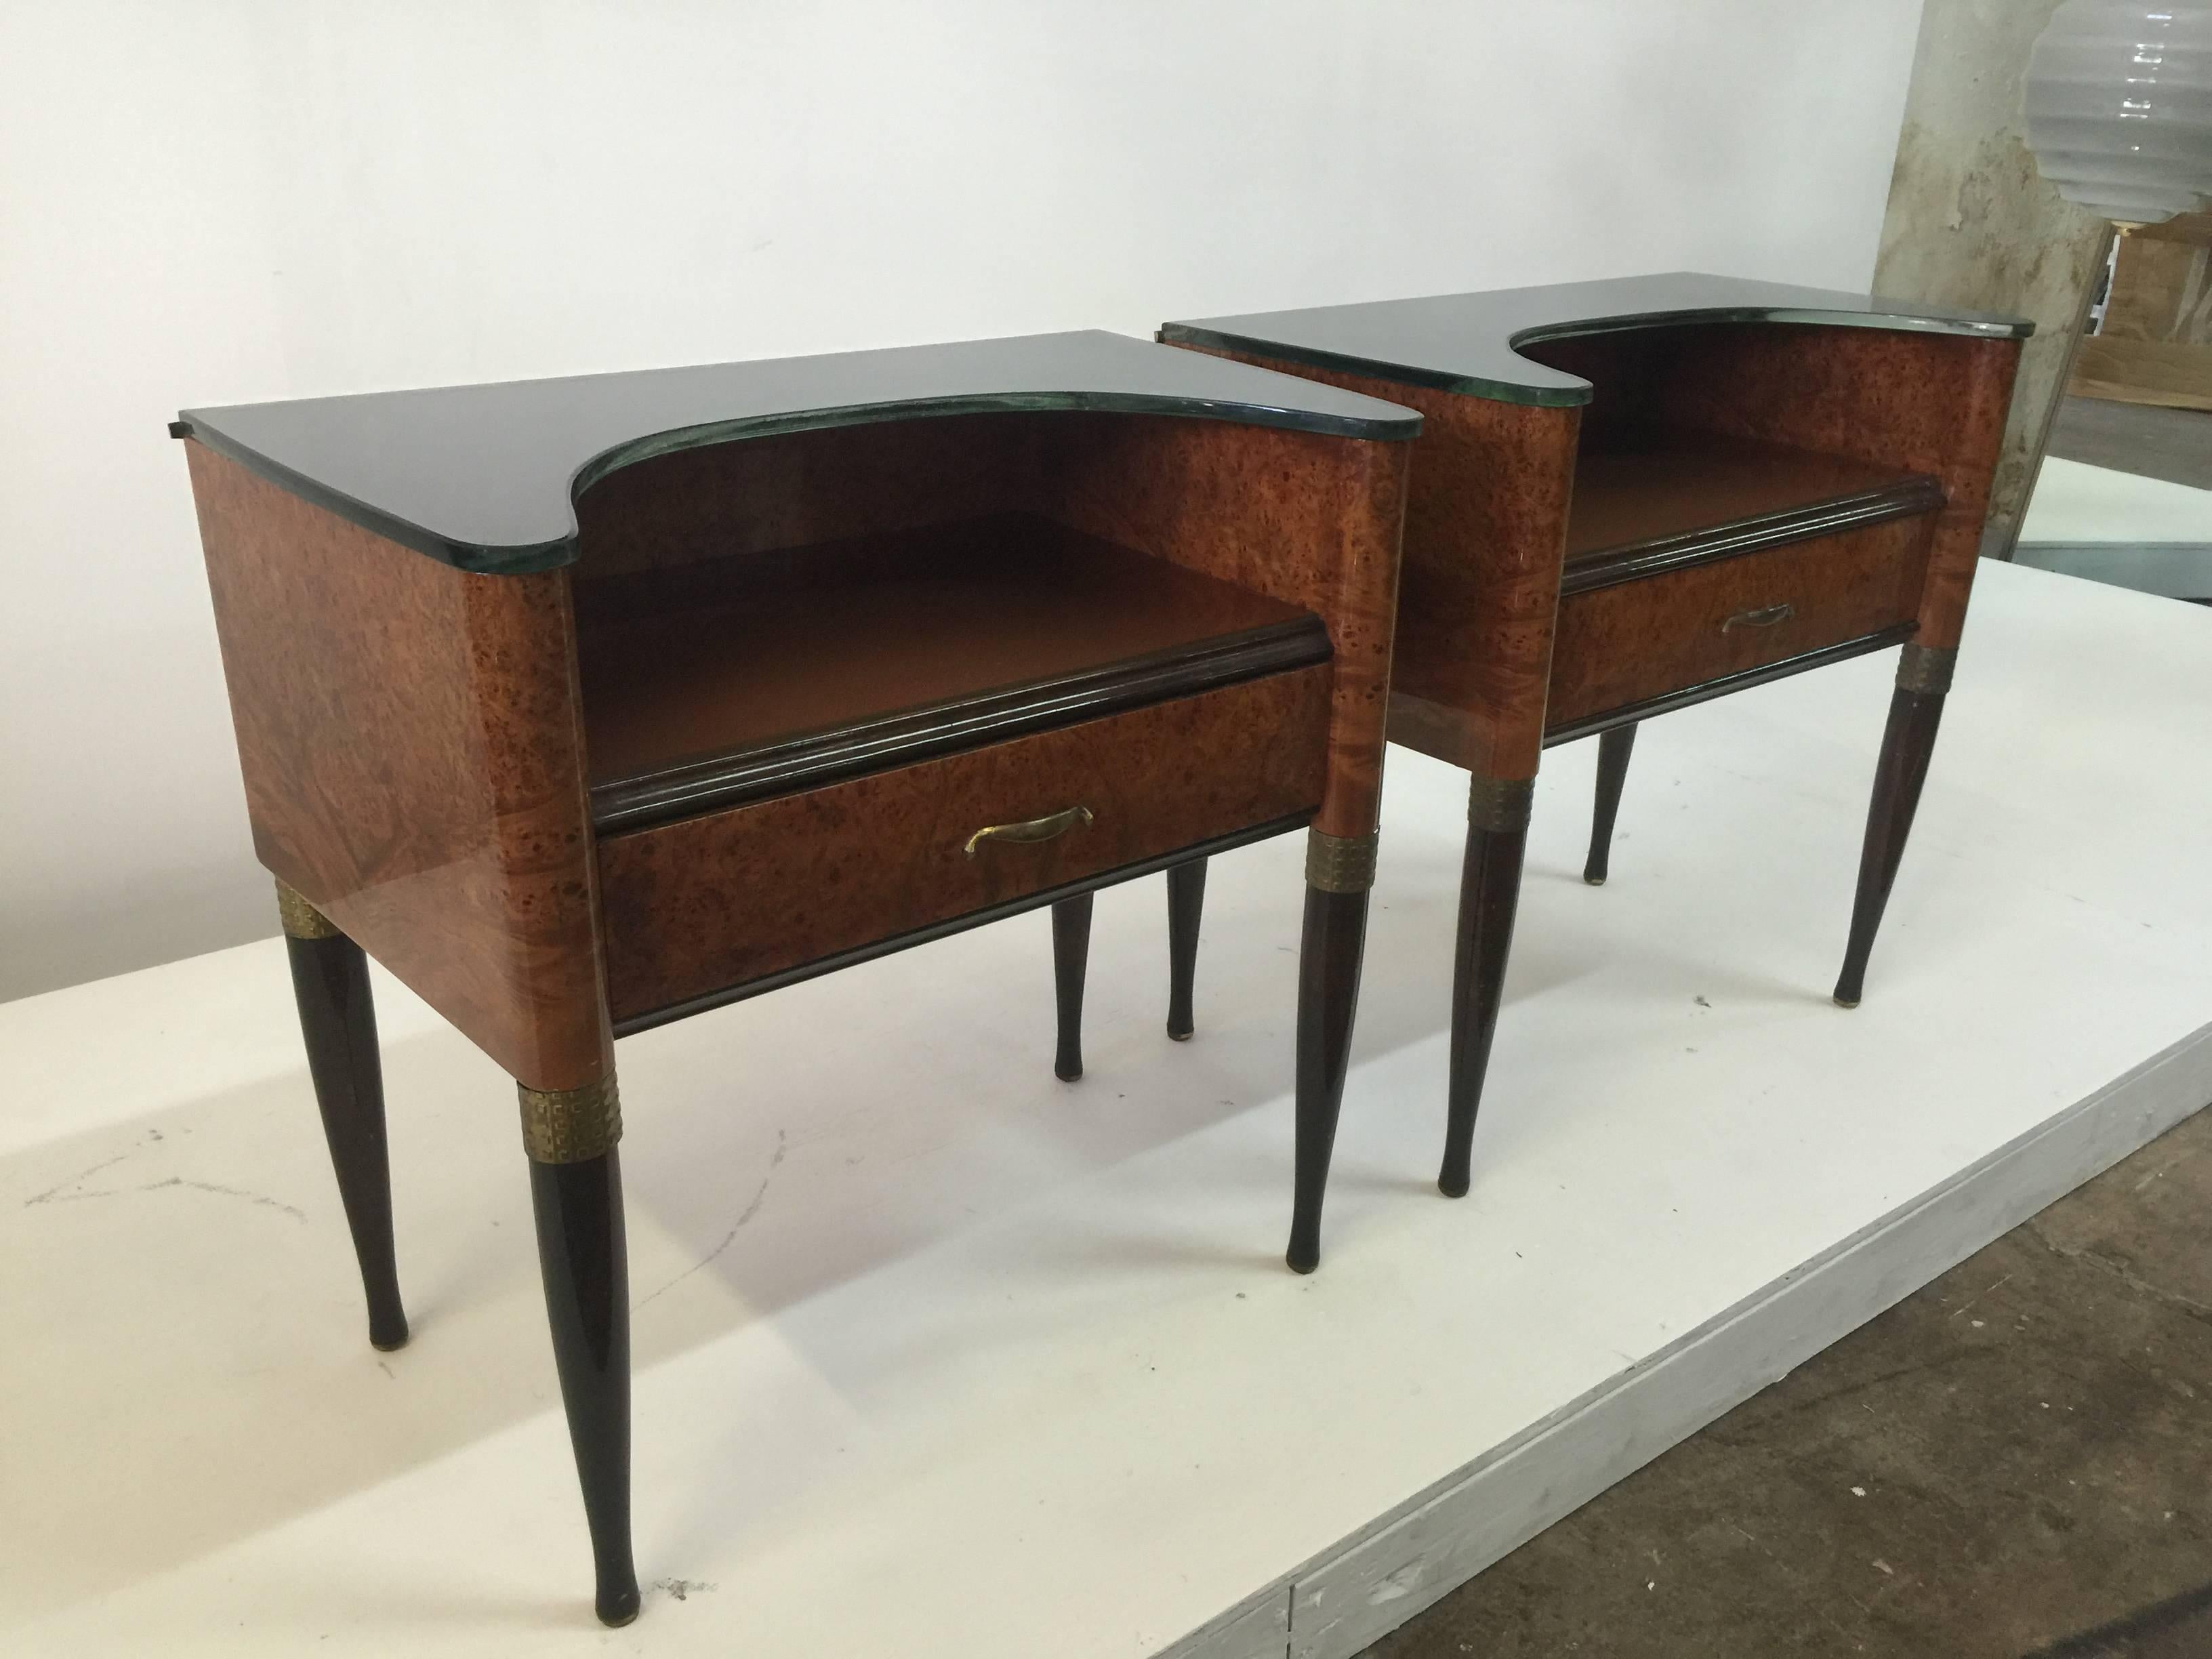 These are rare! A wonderful pair of two-tiered night tables. Single drawer each with original brass hardware and accents. Glass is all original on both levels, top shelf level is a curved glass for added flair! Burl wood and walnut.